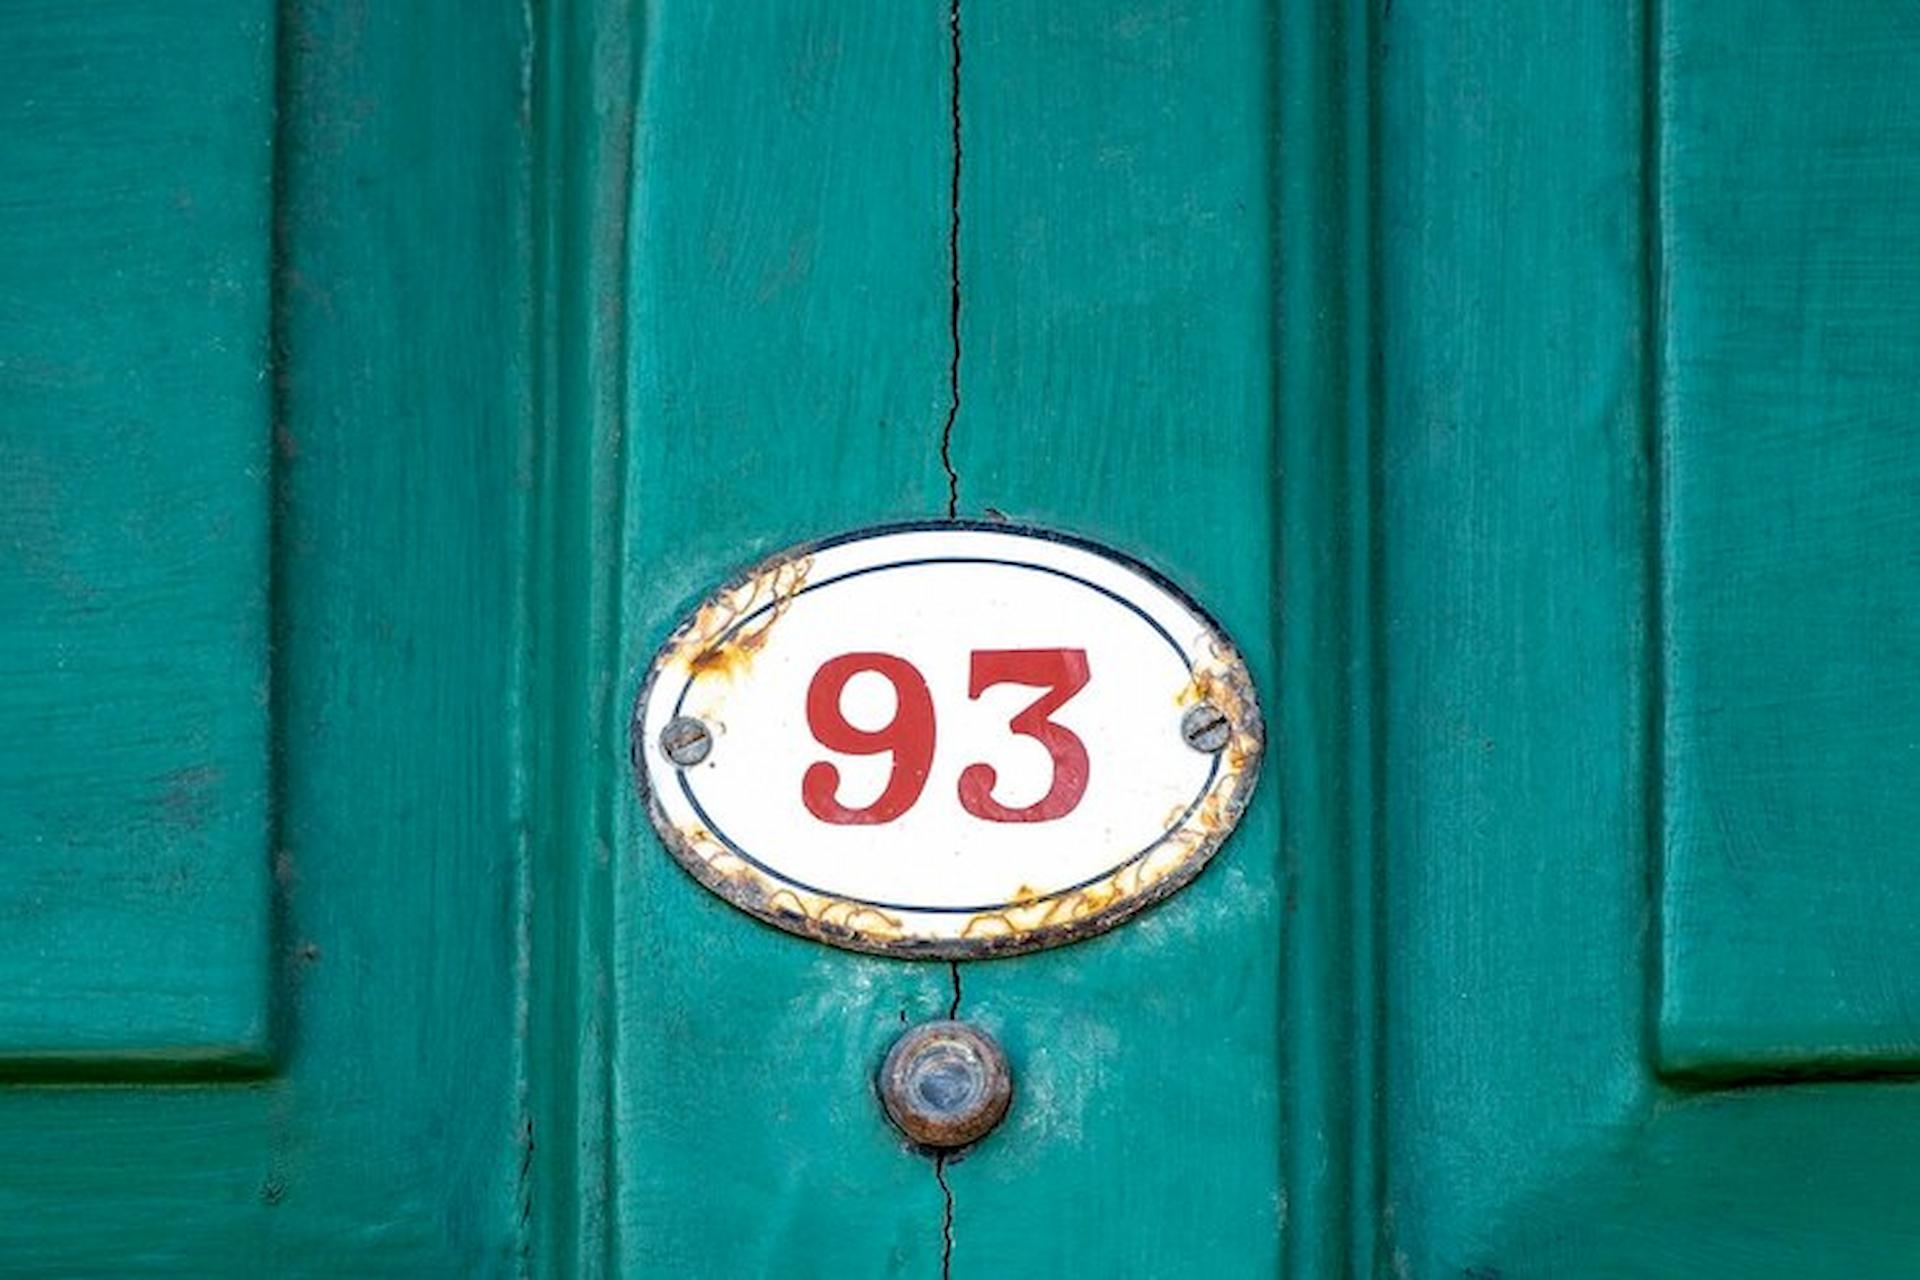 Creative House Number Plaque Ideas To Enhance Your Home’s Curb Appeal